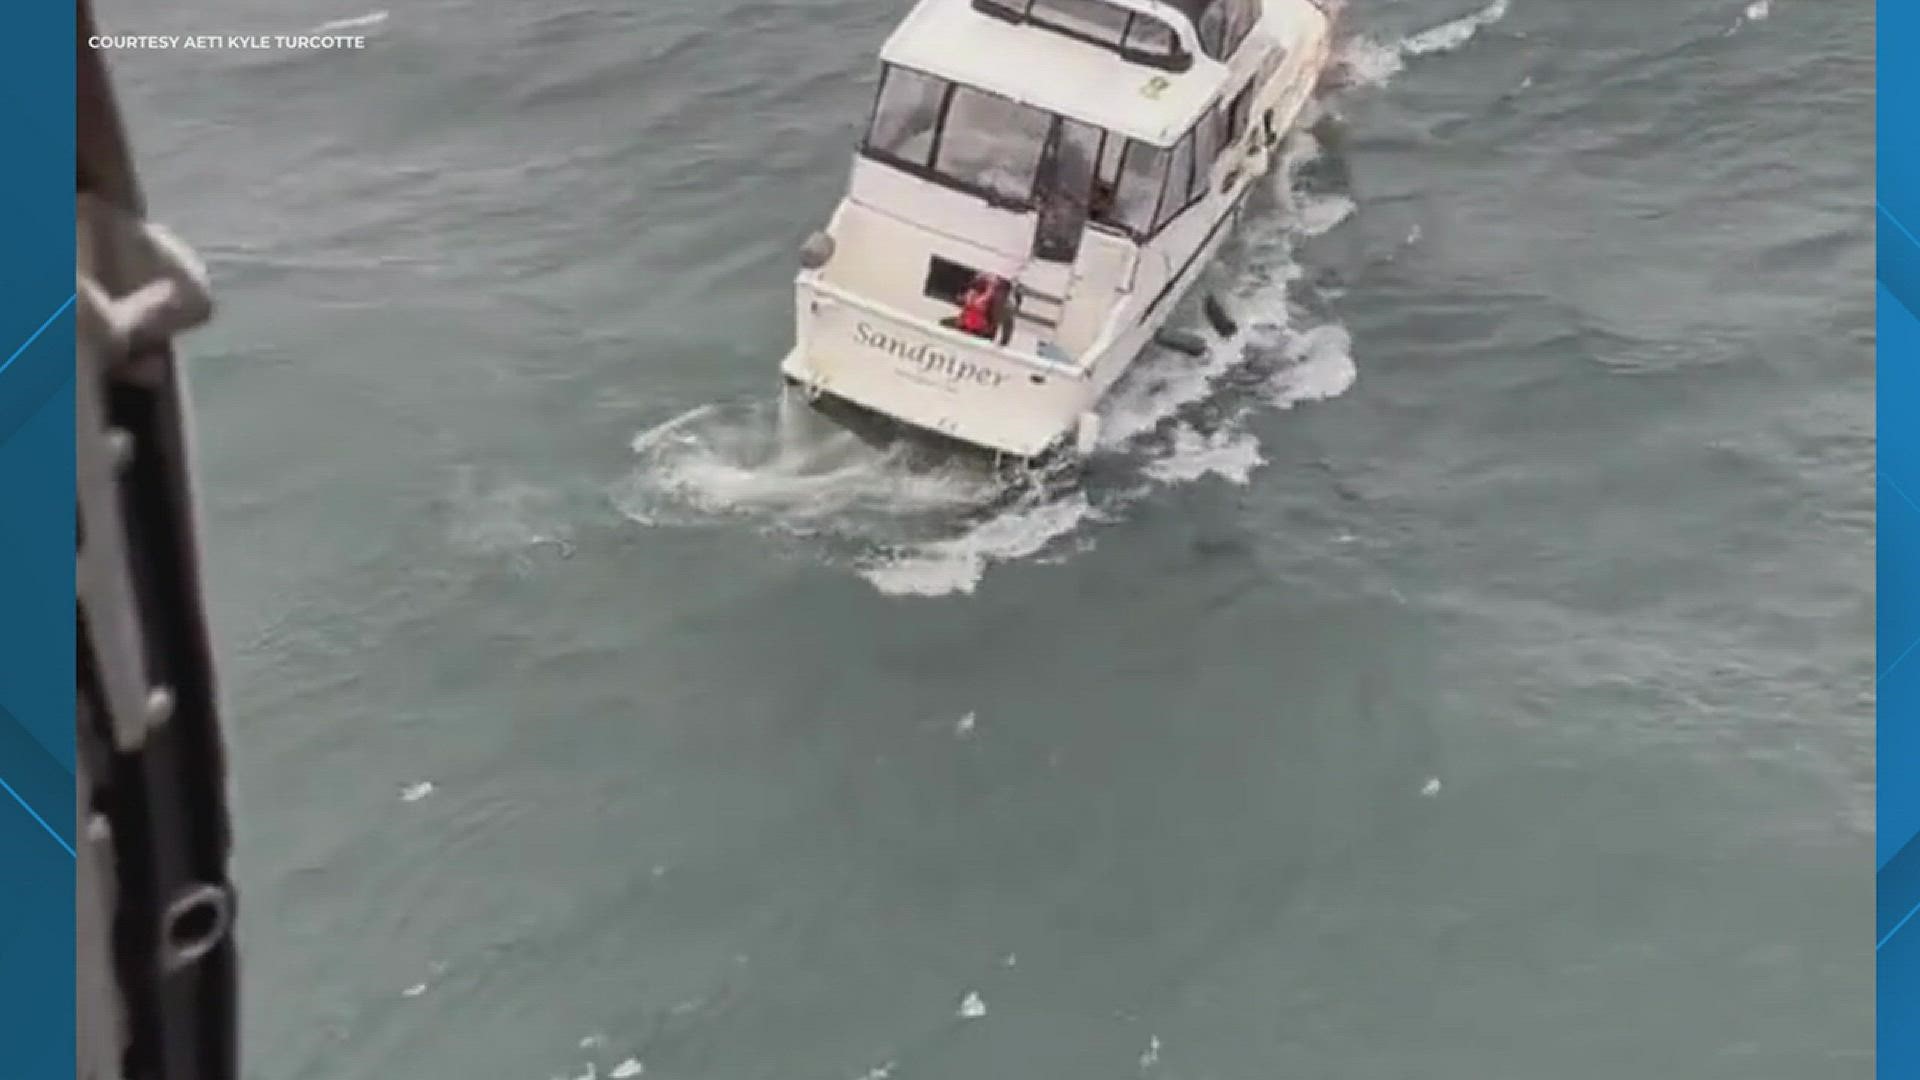 Coast Guard air crews received a may day call and responded to attempt to rescue a person on a vessel. As a swimmer approached the boat, a wave caused it to capsize.